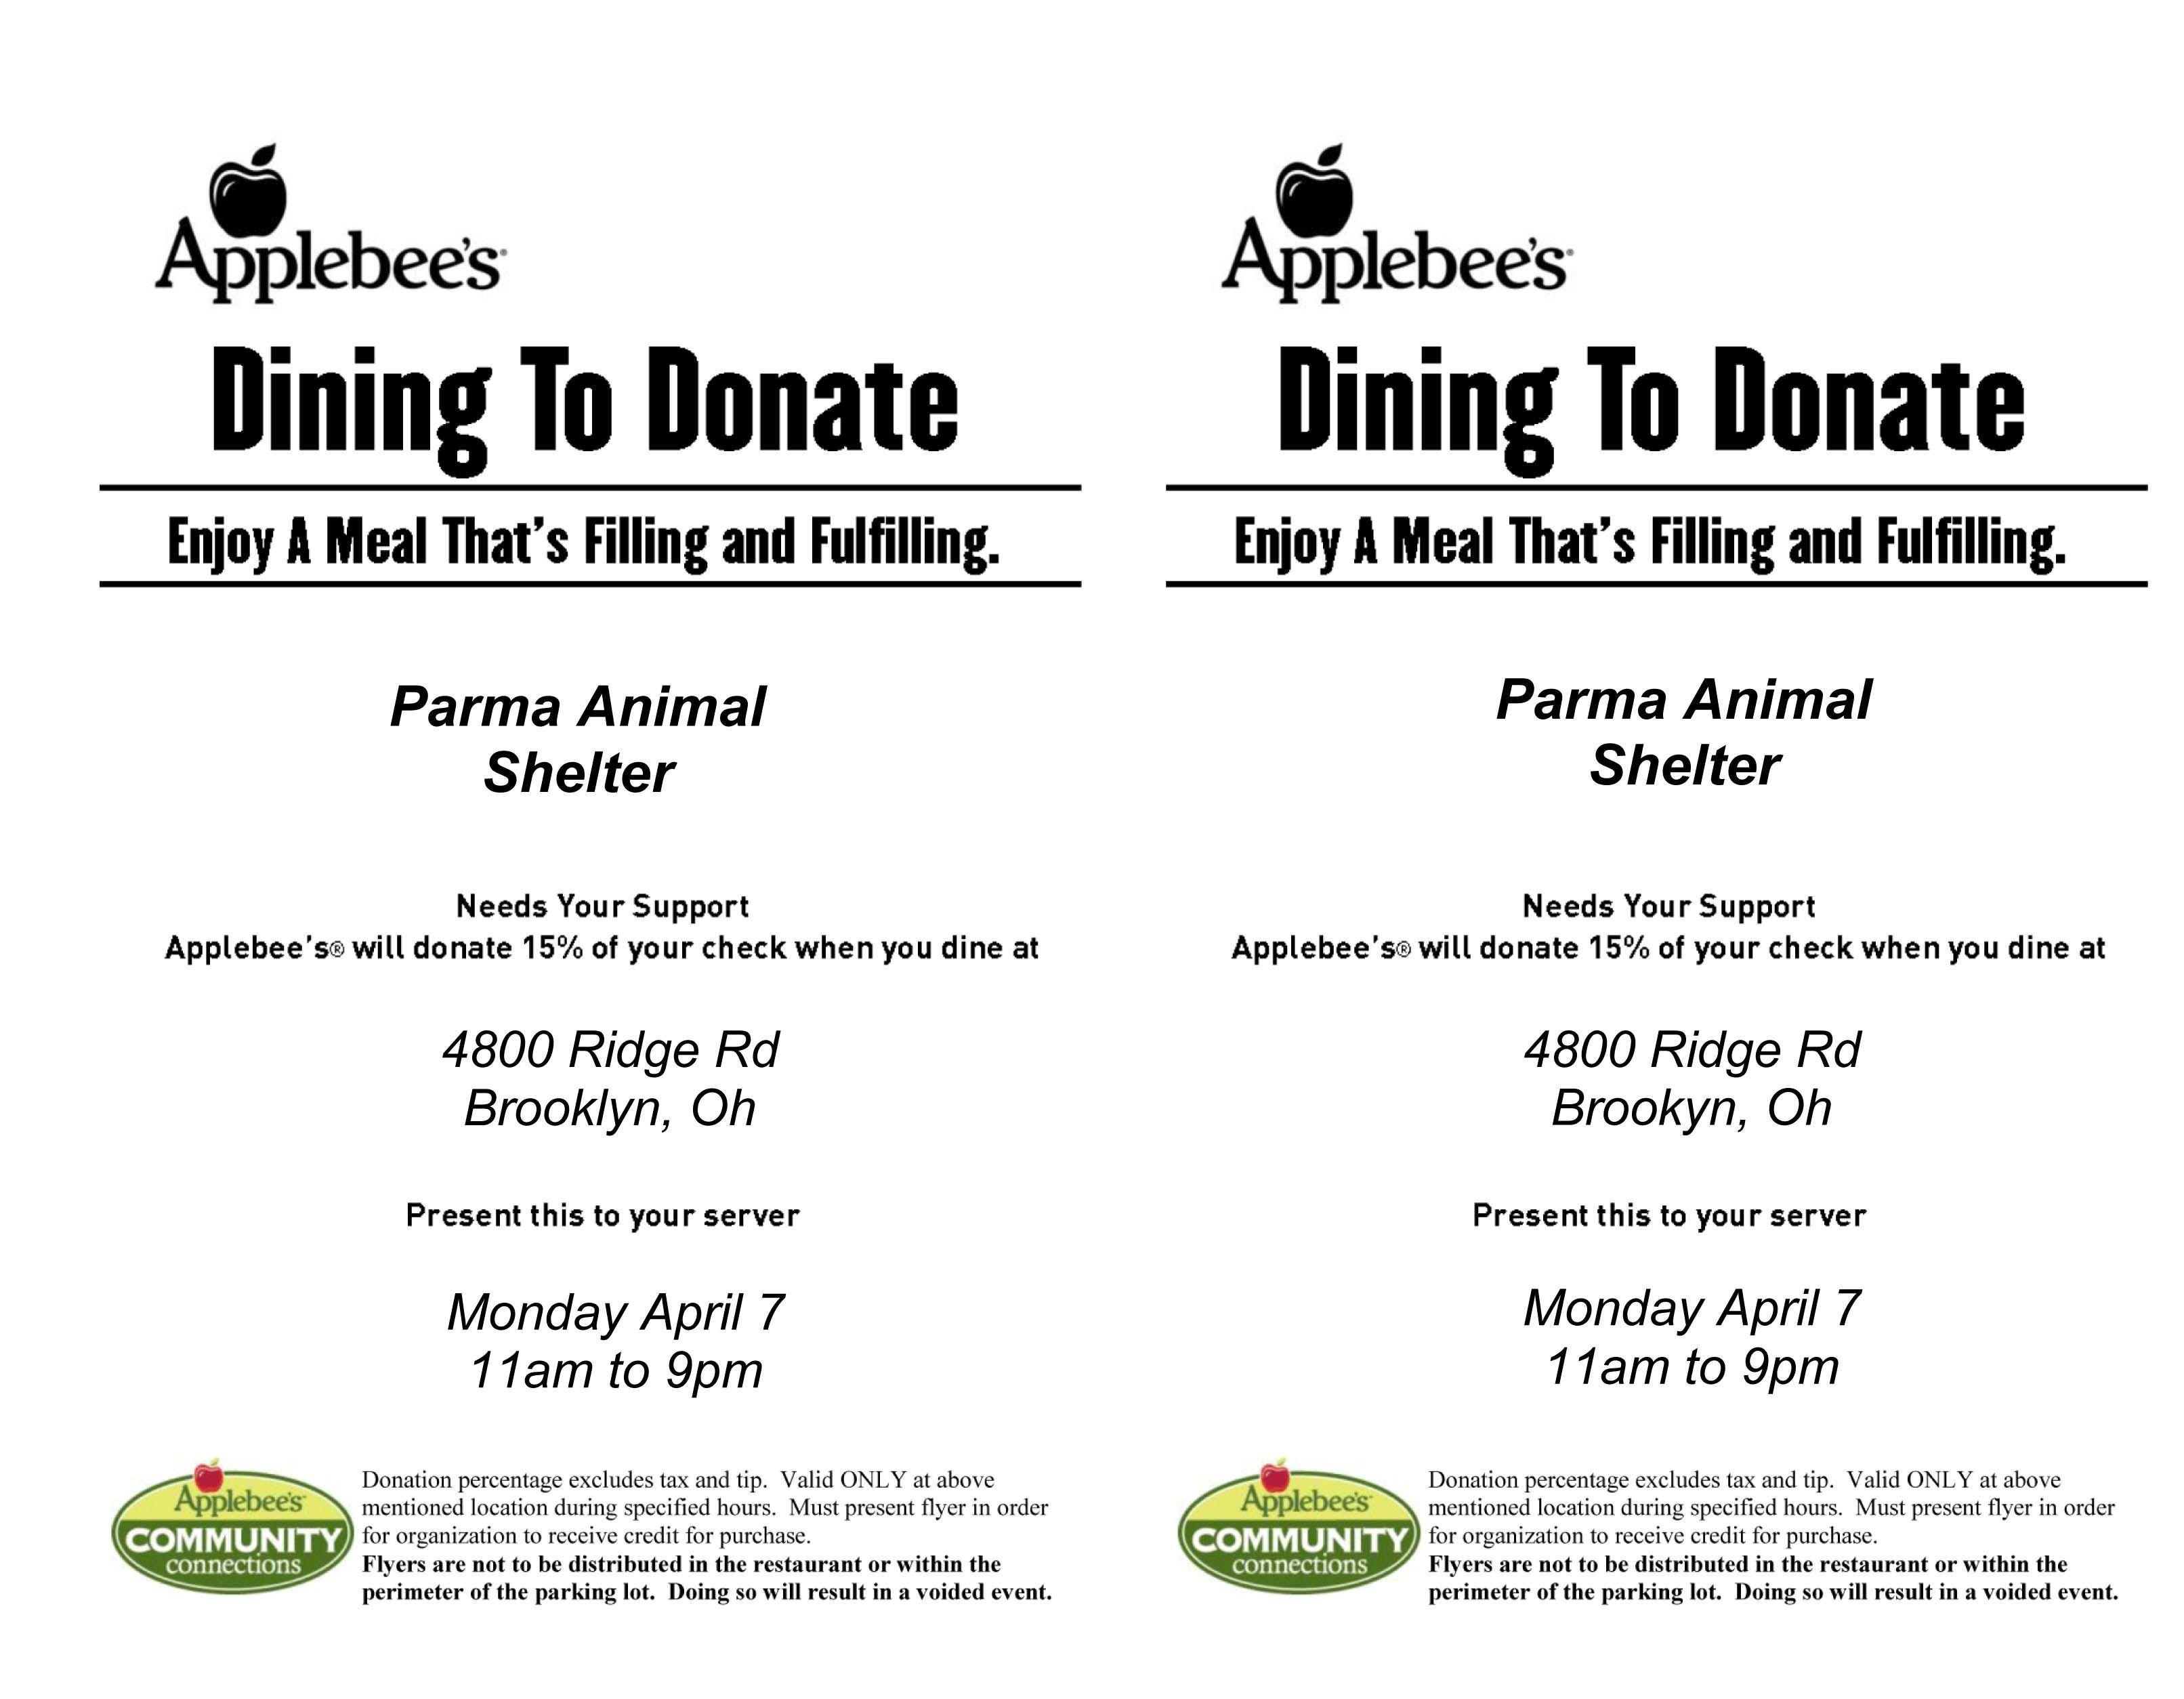 Applebee's Community Connections Logo - YUMMY IN YOUR TUMMY* April 7th Applebee's Dining to Donate ...